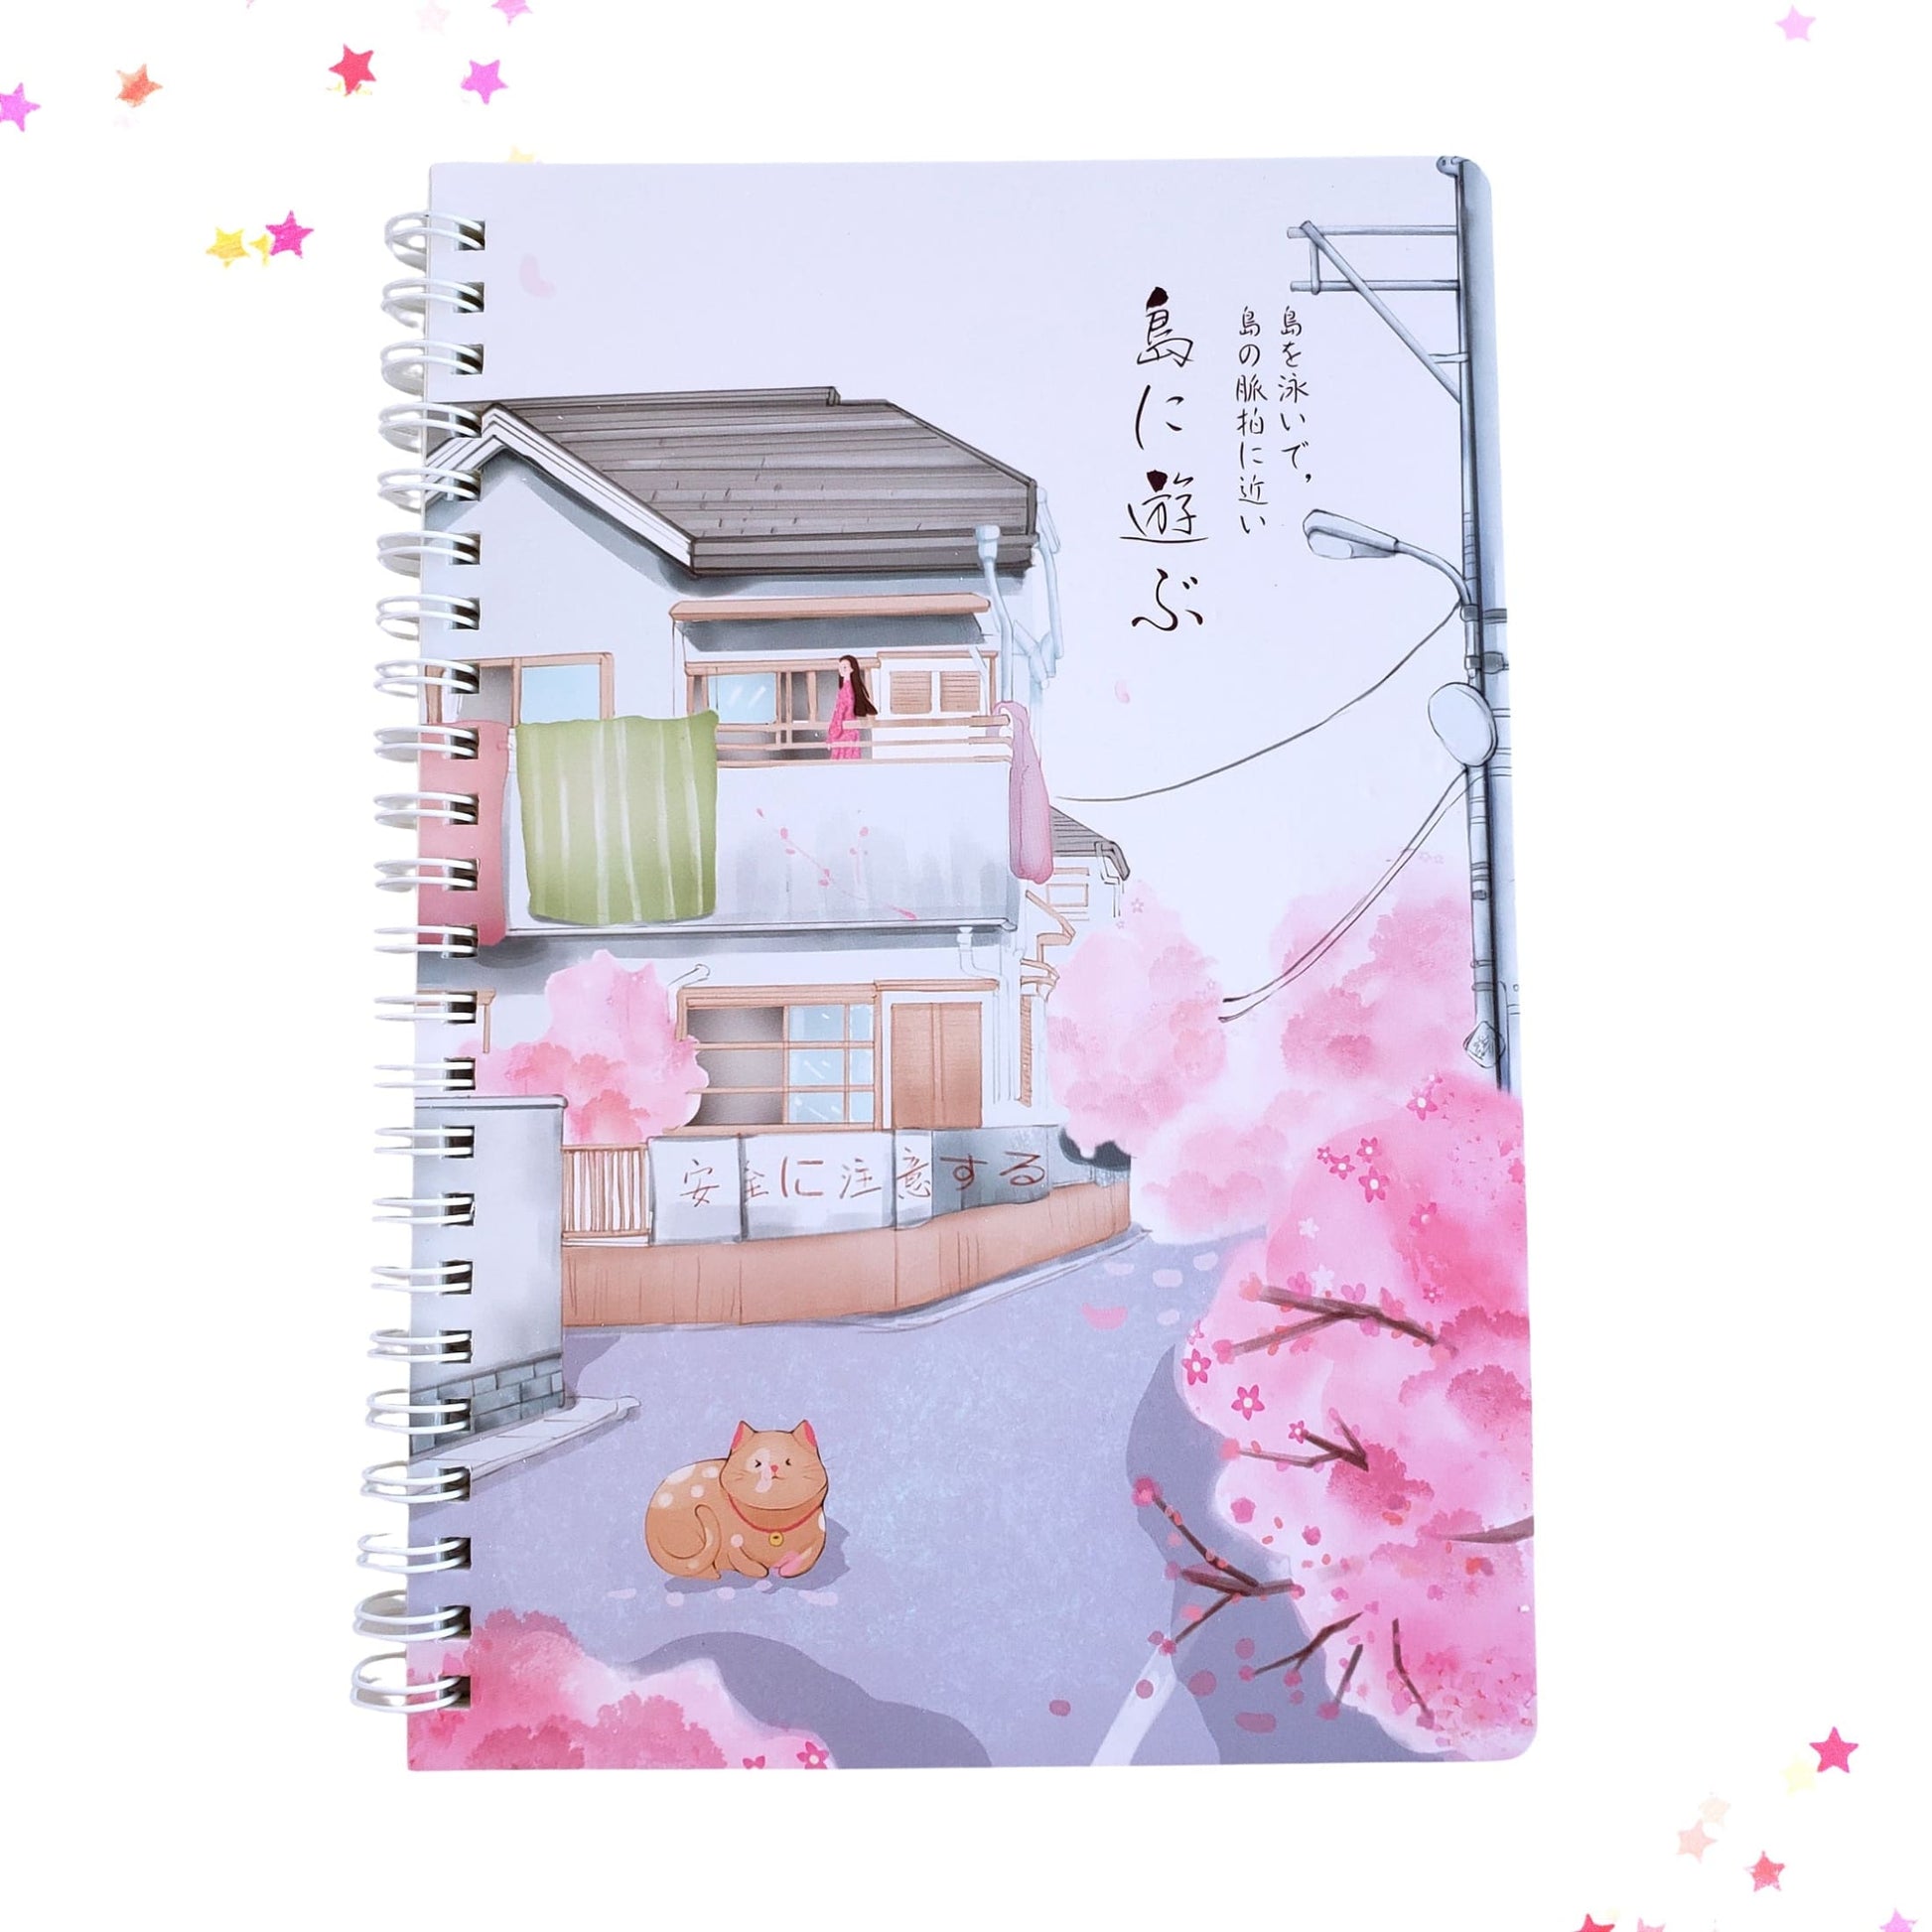 Japanese Daily Life Journal Notebook, Home Sweet Home from Confetti Kitty, Only 7.99